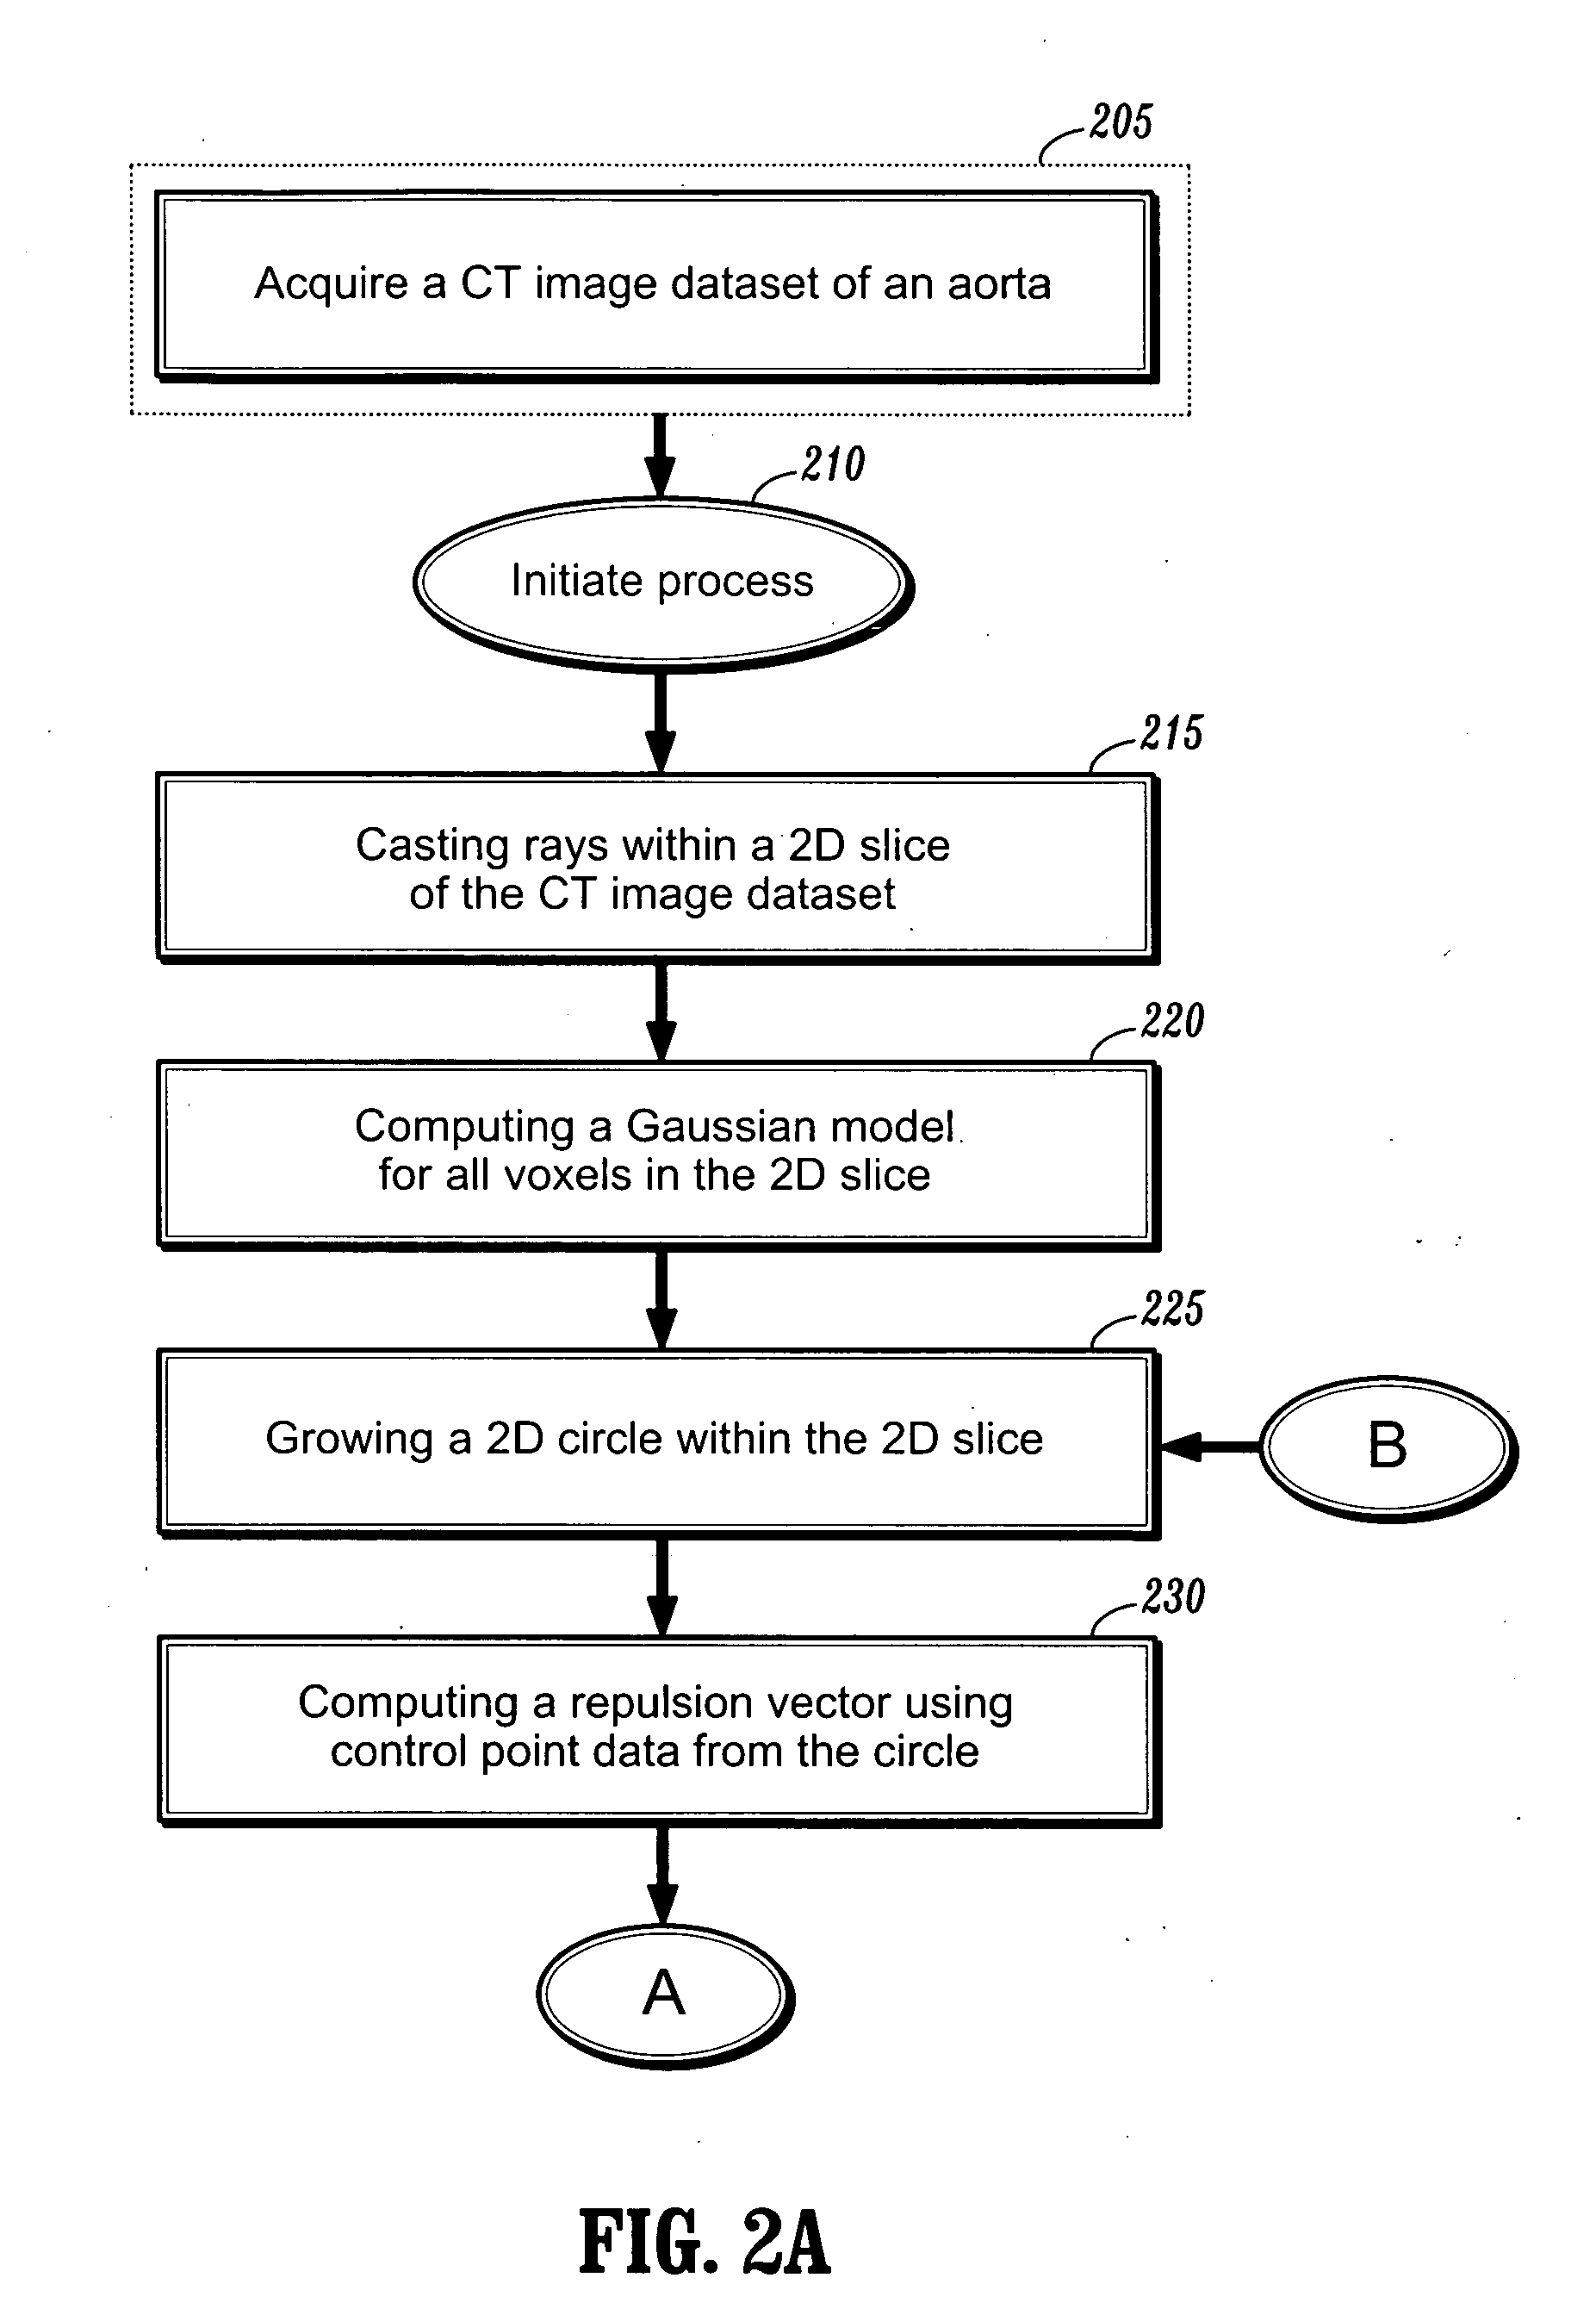 System and method for detecting the aortic valve using a model-based segmentation technique